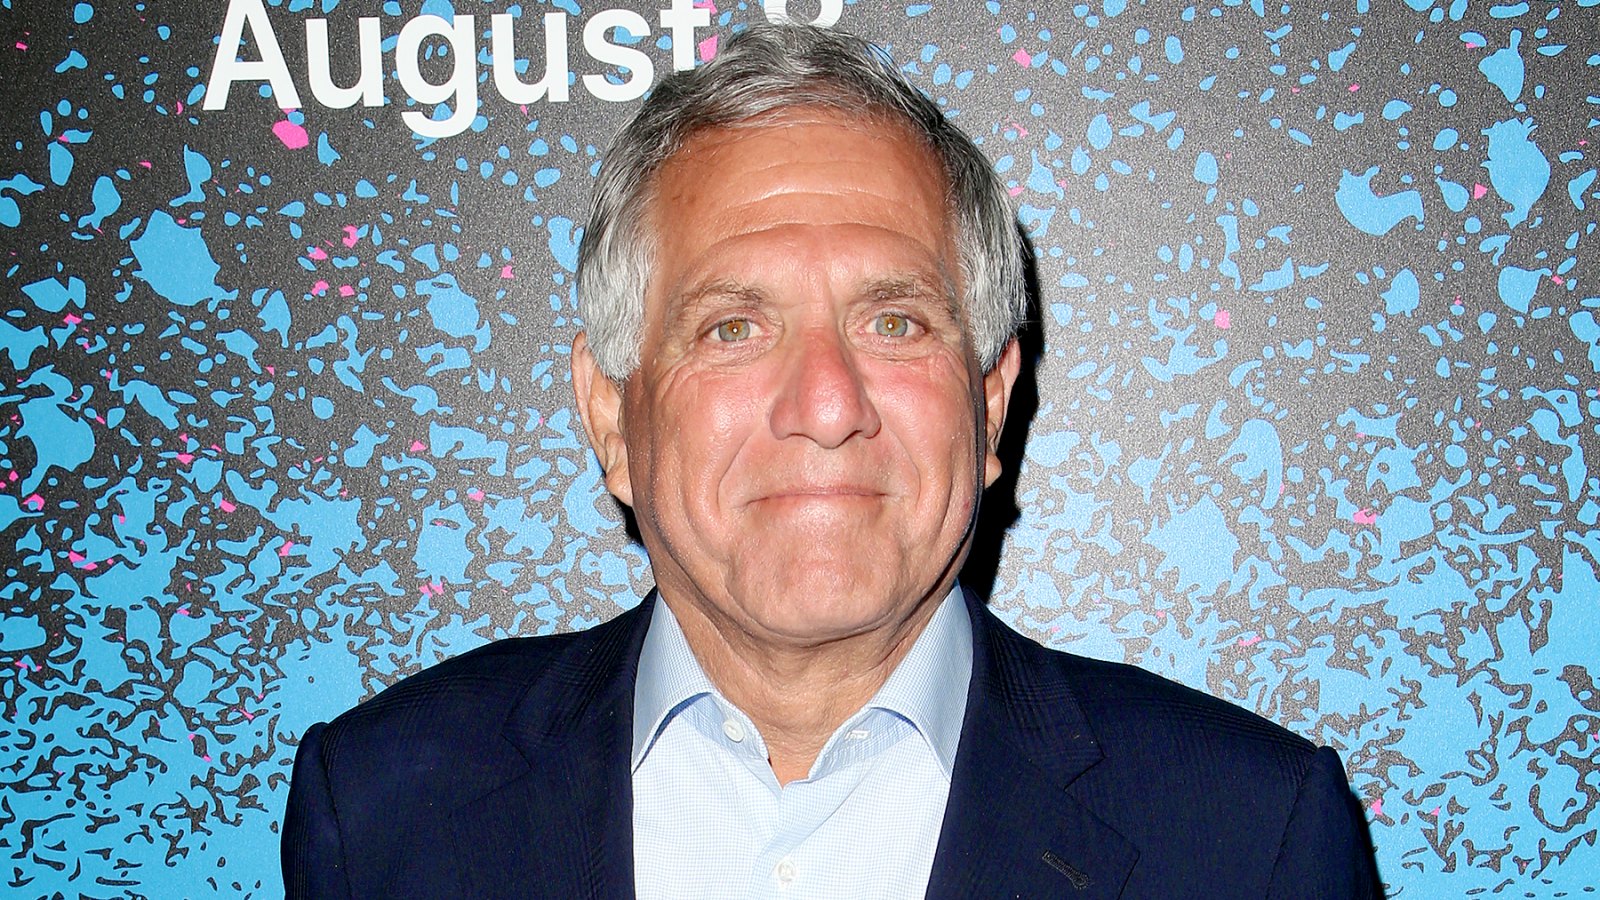 Les-Moonves-suspended